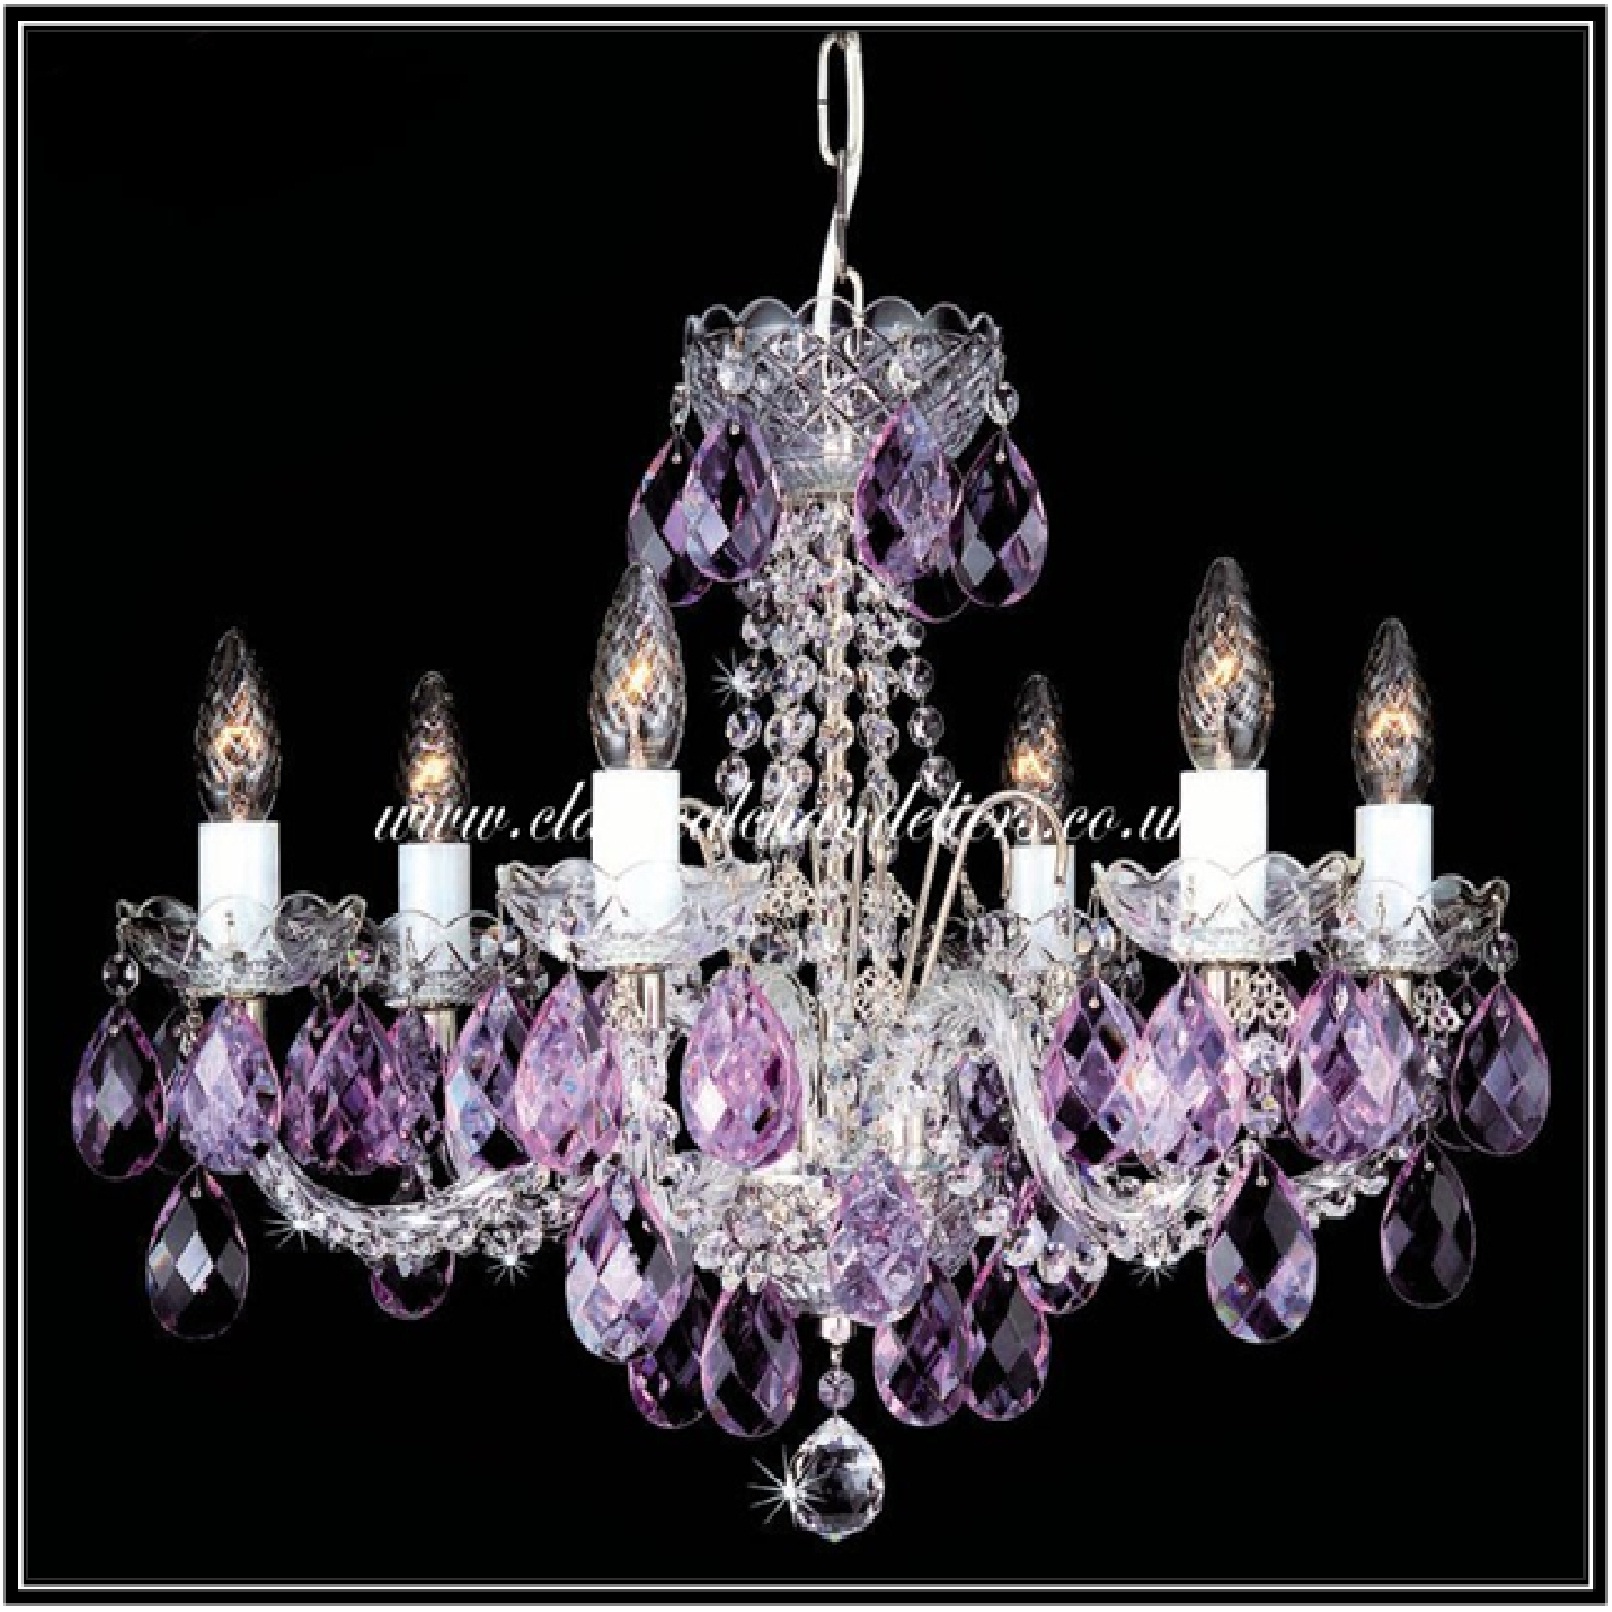 Crystal chandeliers for all sized homes - Home decor ideas